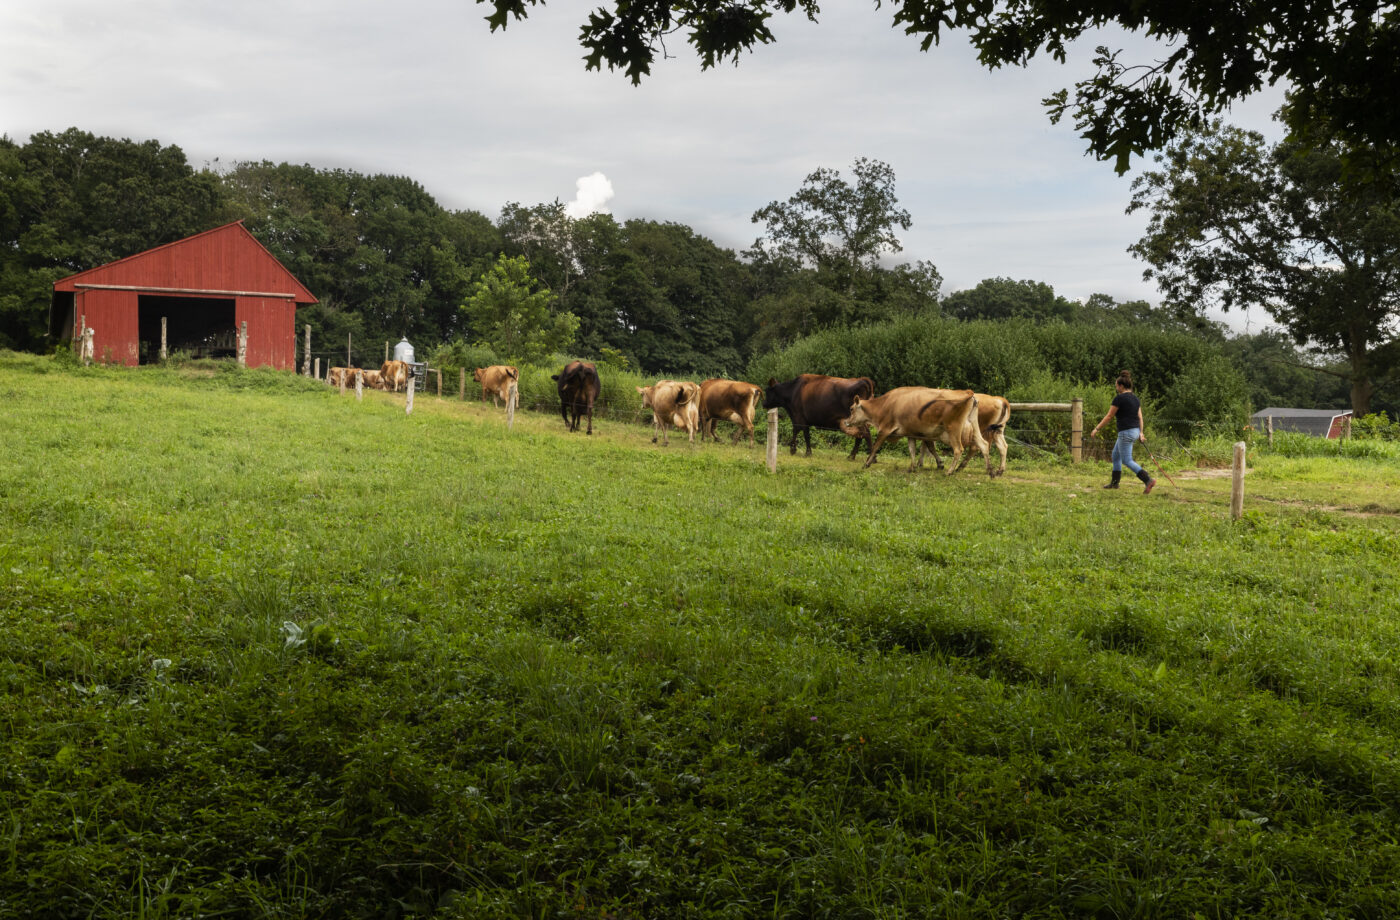 cows in a pasture walking towards a red barn